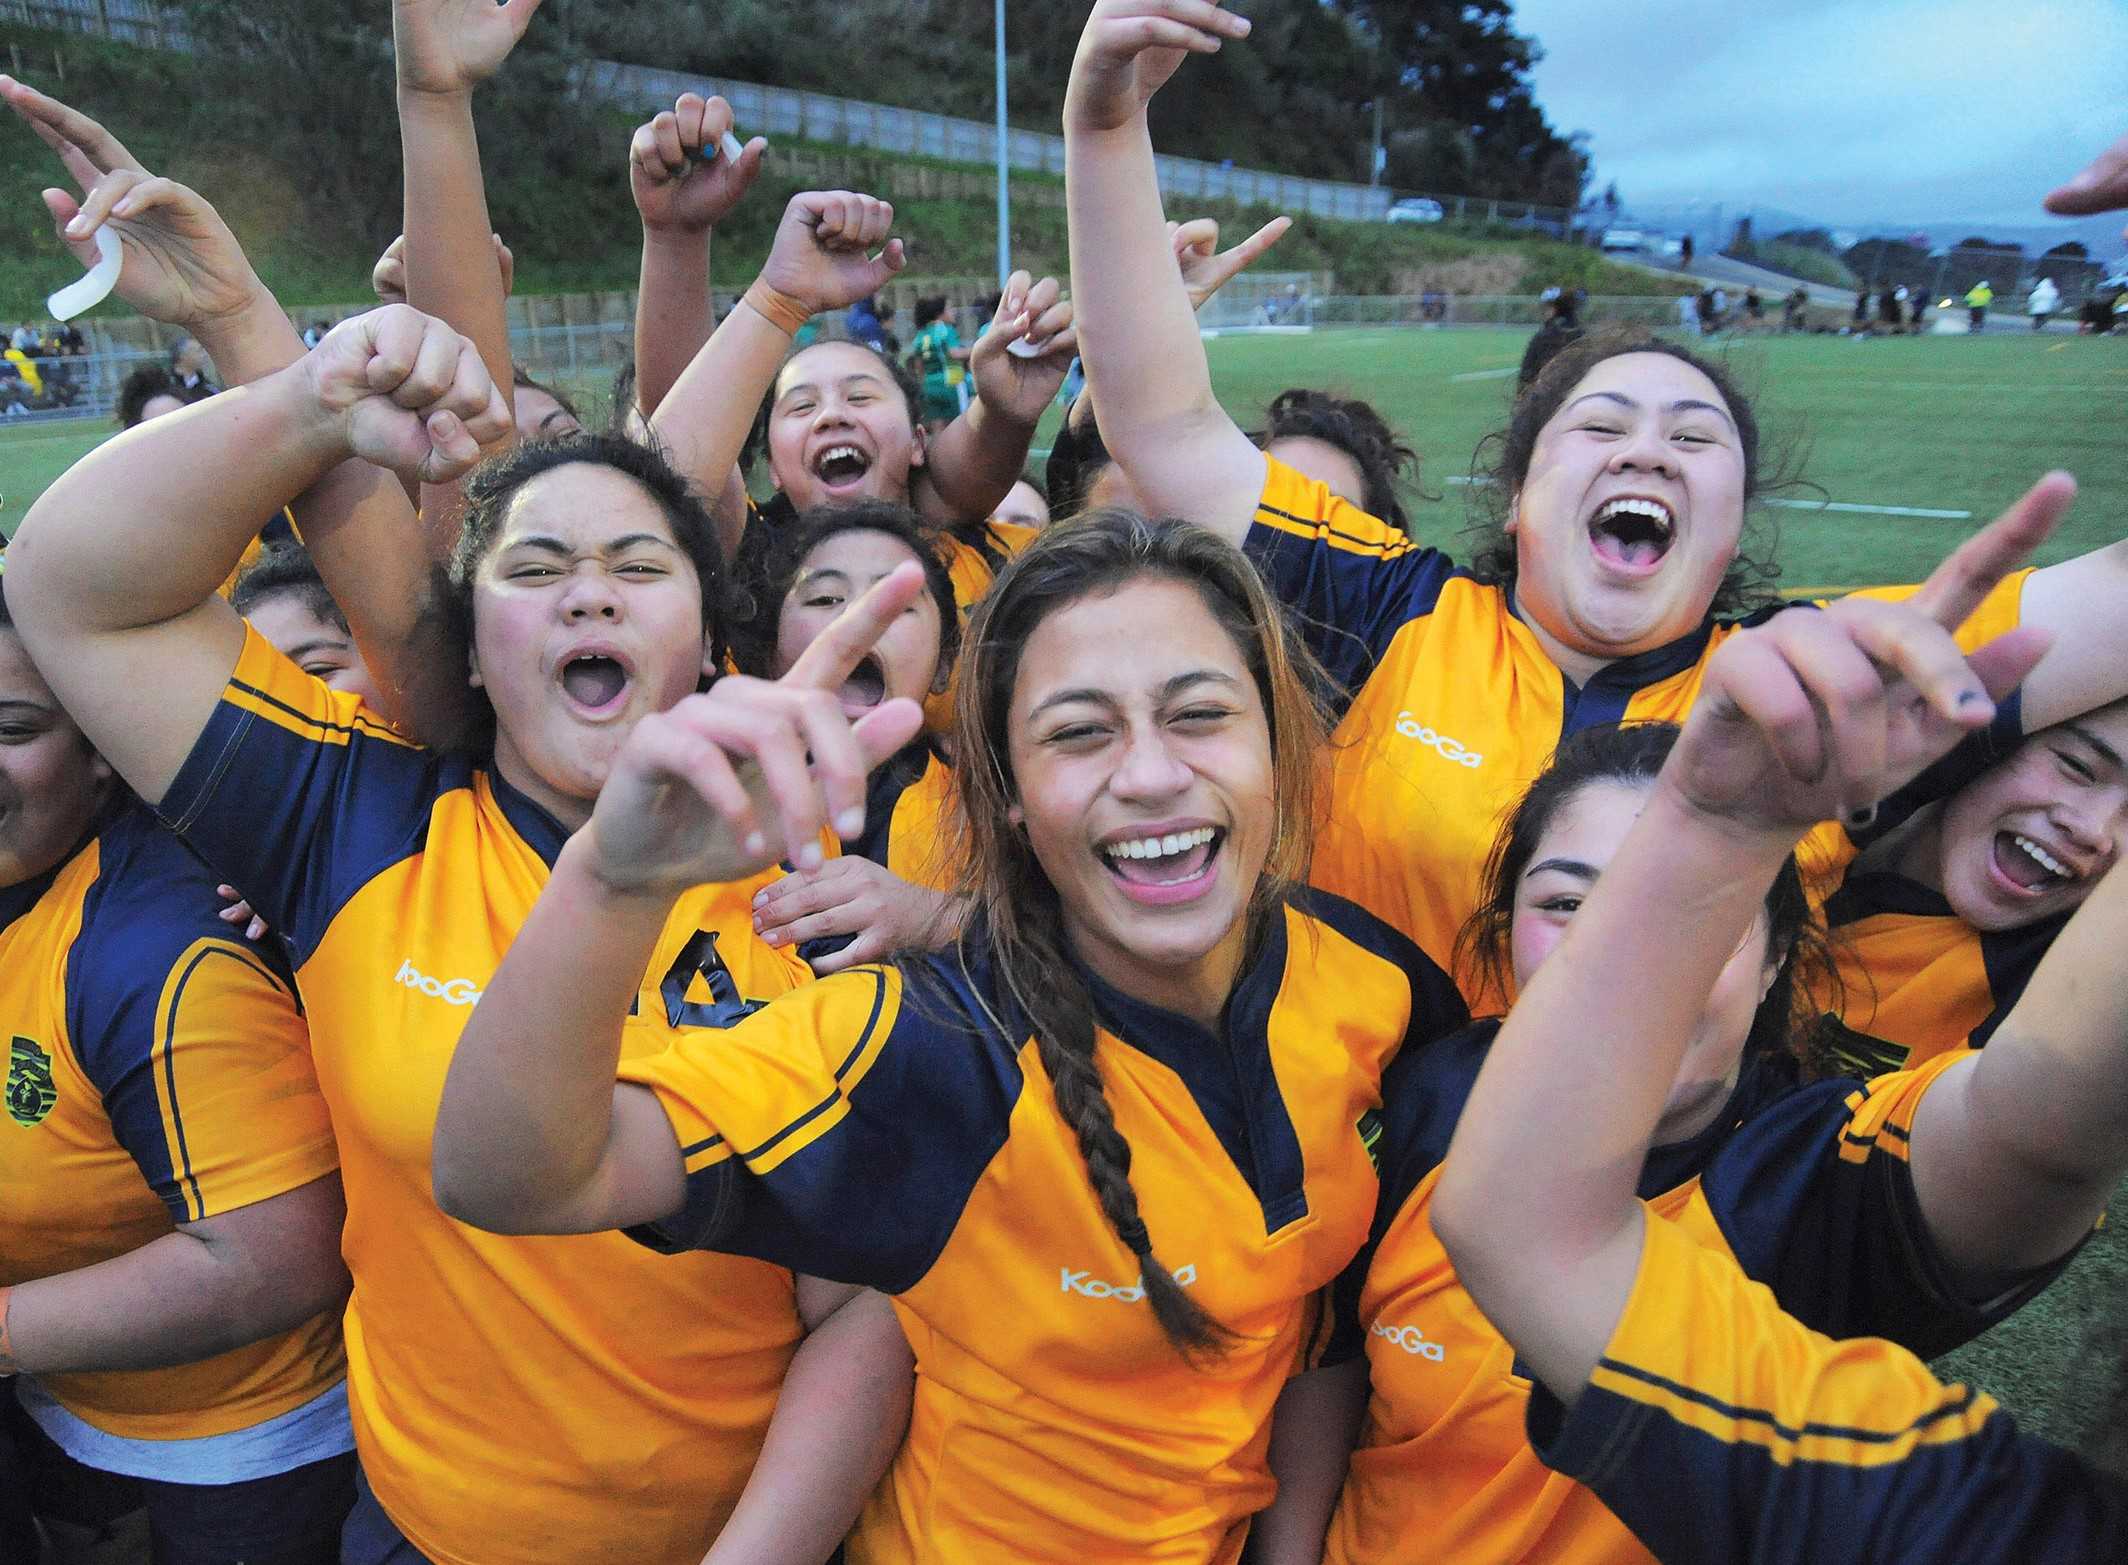 The WEGS team celebrates winning the Wellington girls college division two rugby final between Wellington East Girls School and Mana College at Te Whaea, Wellington, New Zealand on Thursday, 8 August 2013. Photo: Dave Lintott / lintottphoto.co.nz